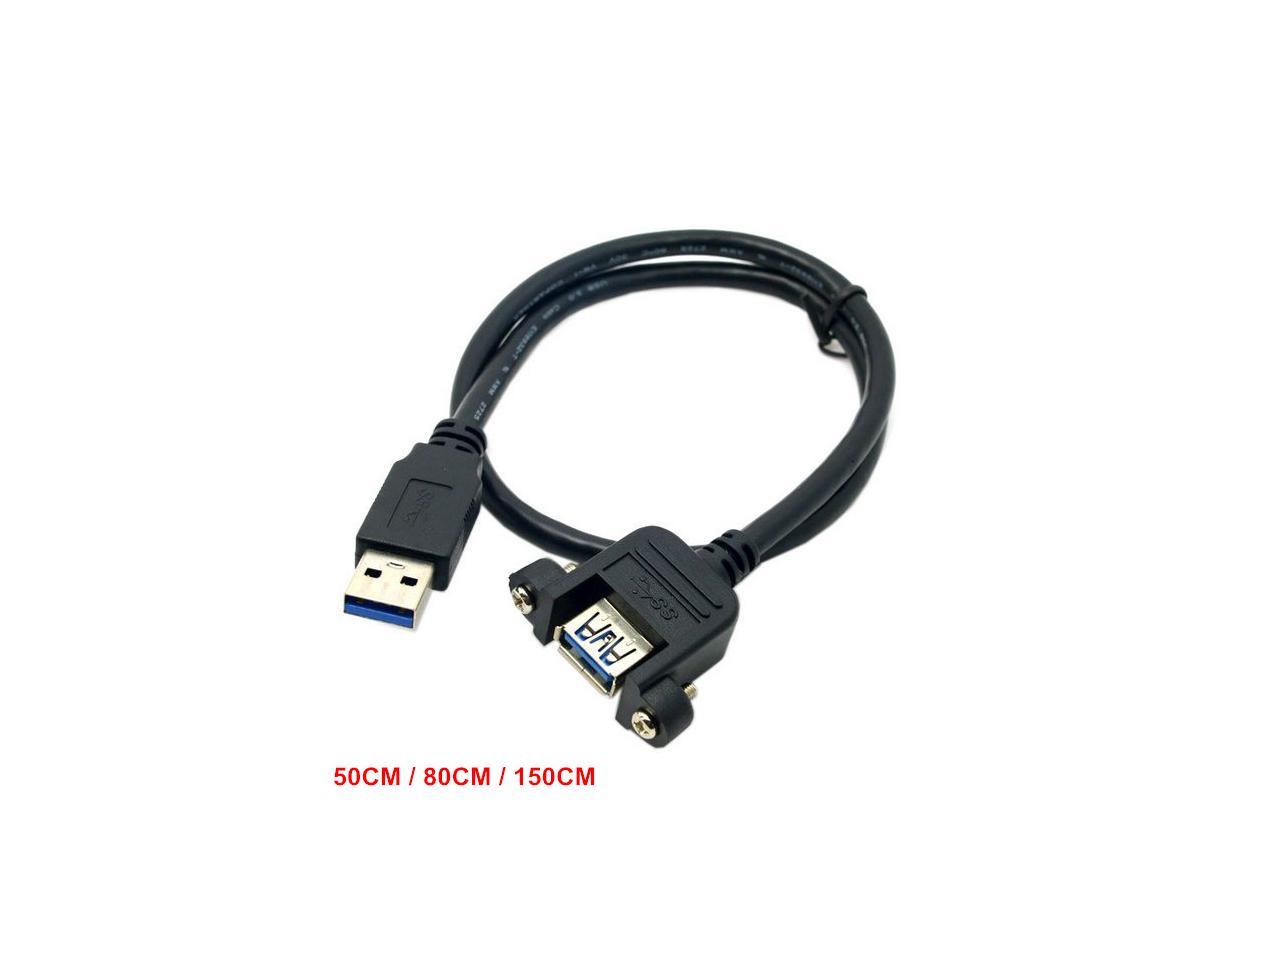 Computer Cables USB 3.0 Male to Female Extension Cable with Panel Mount Screw Hole Lock Connector Adapter Cord for Computer Blue Wholesale Cable Length: 150cm 